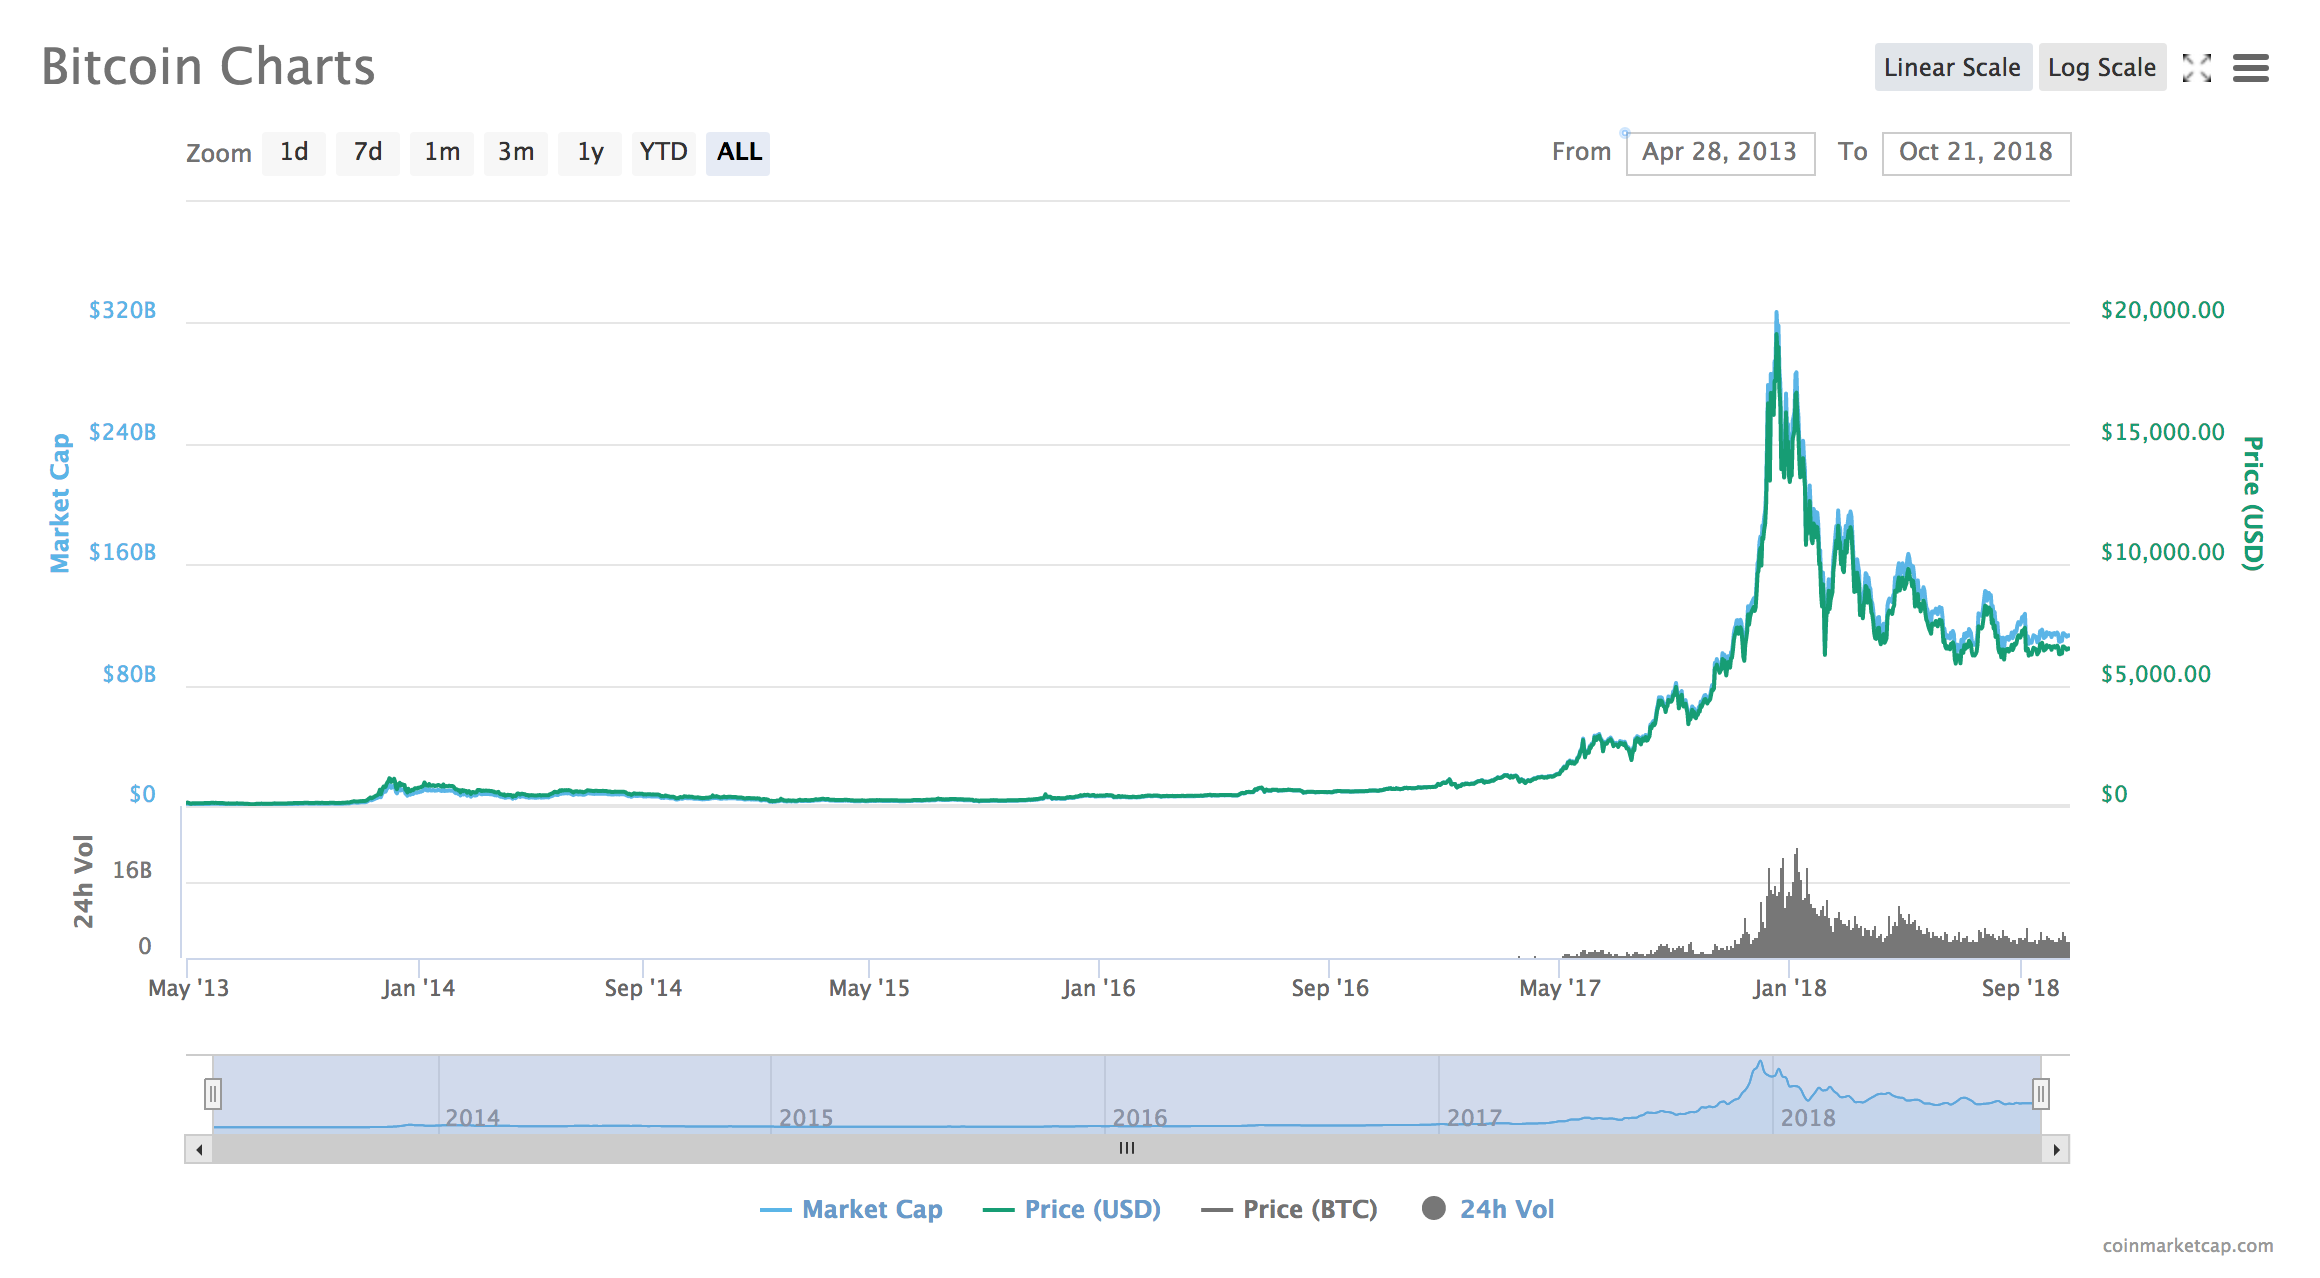 Bitcoin historical price chart 2013 to 2018. Can stablecoins help smooth out price movements?